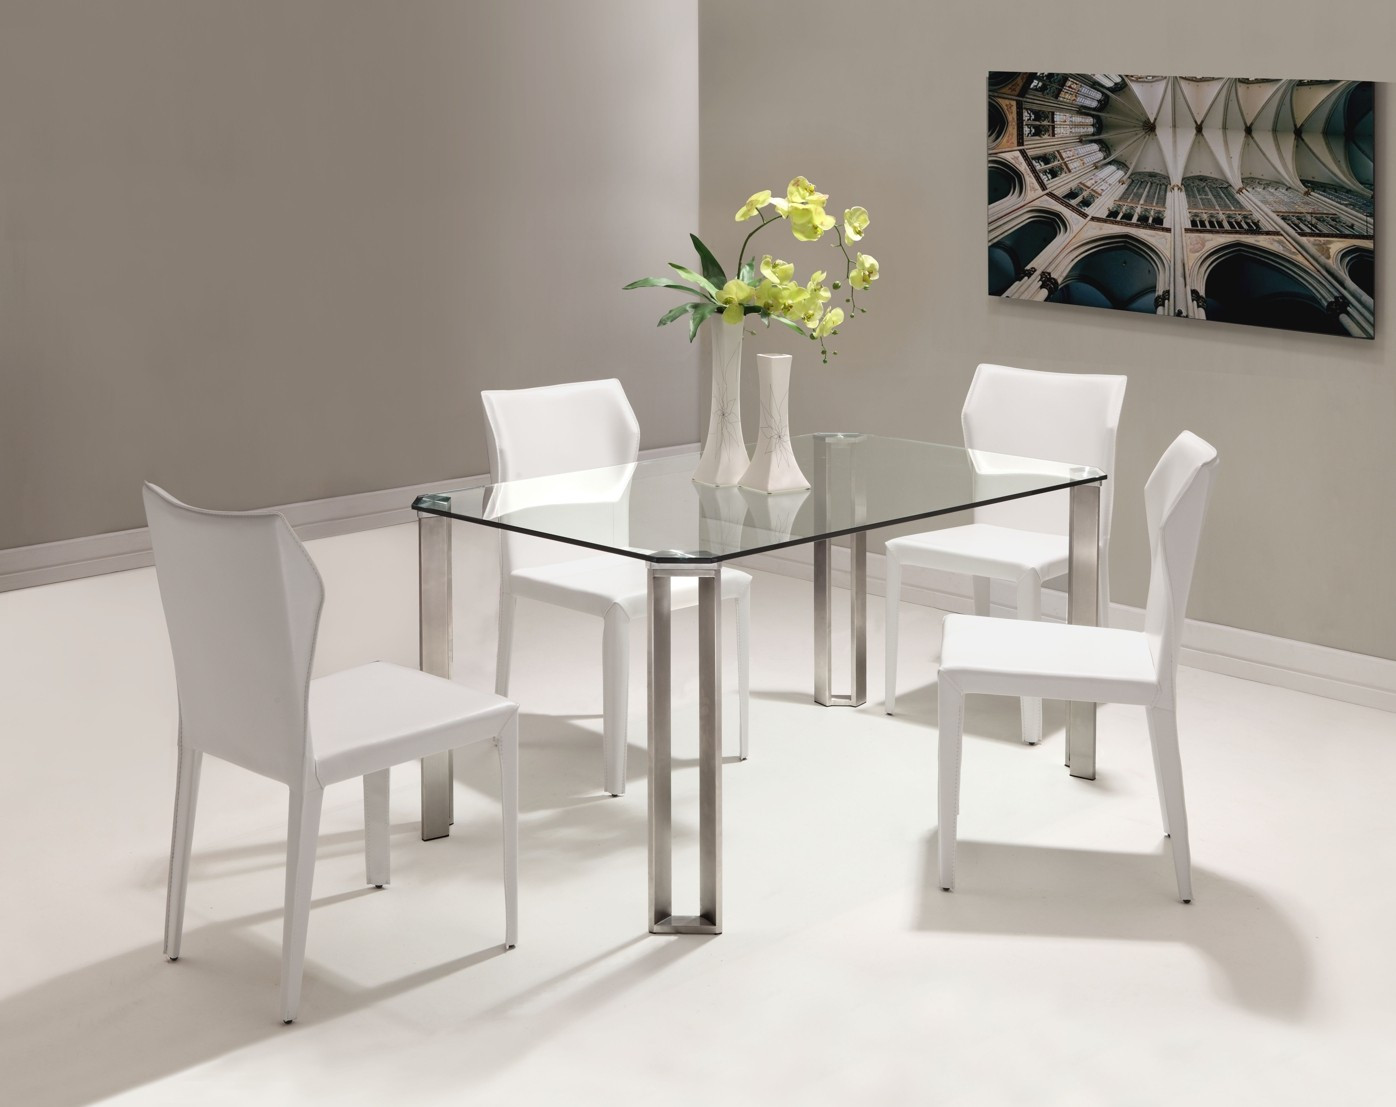 Small Modern Kitchen Table
 The Small Rectangular Dining Table That is Perfect for